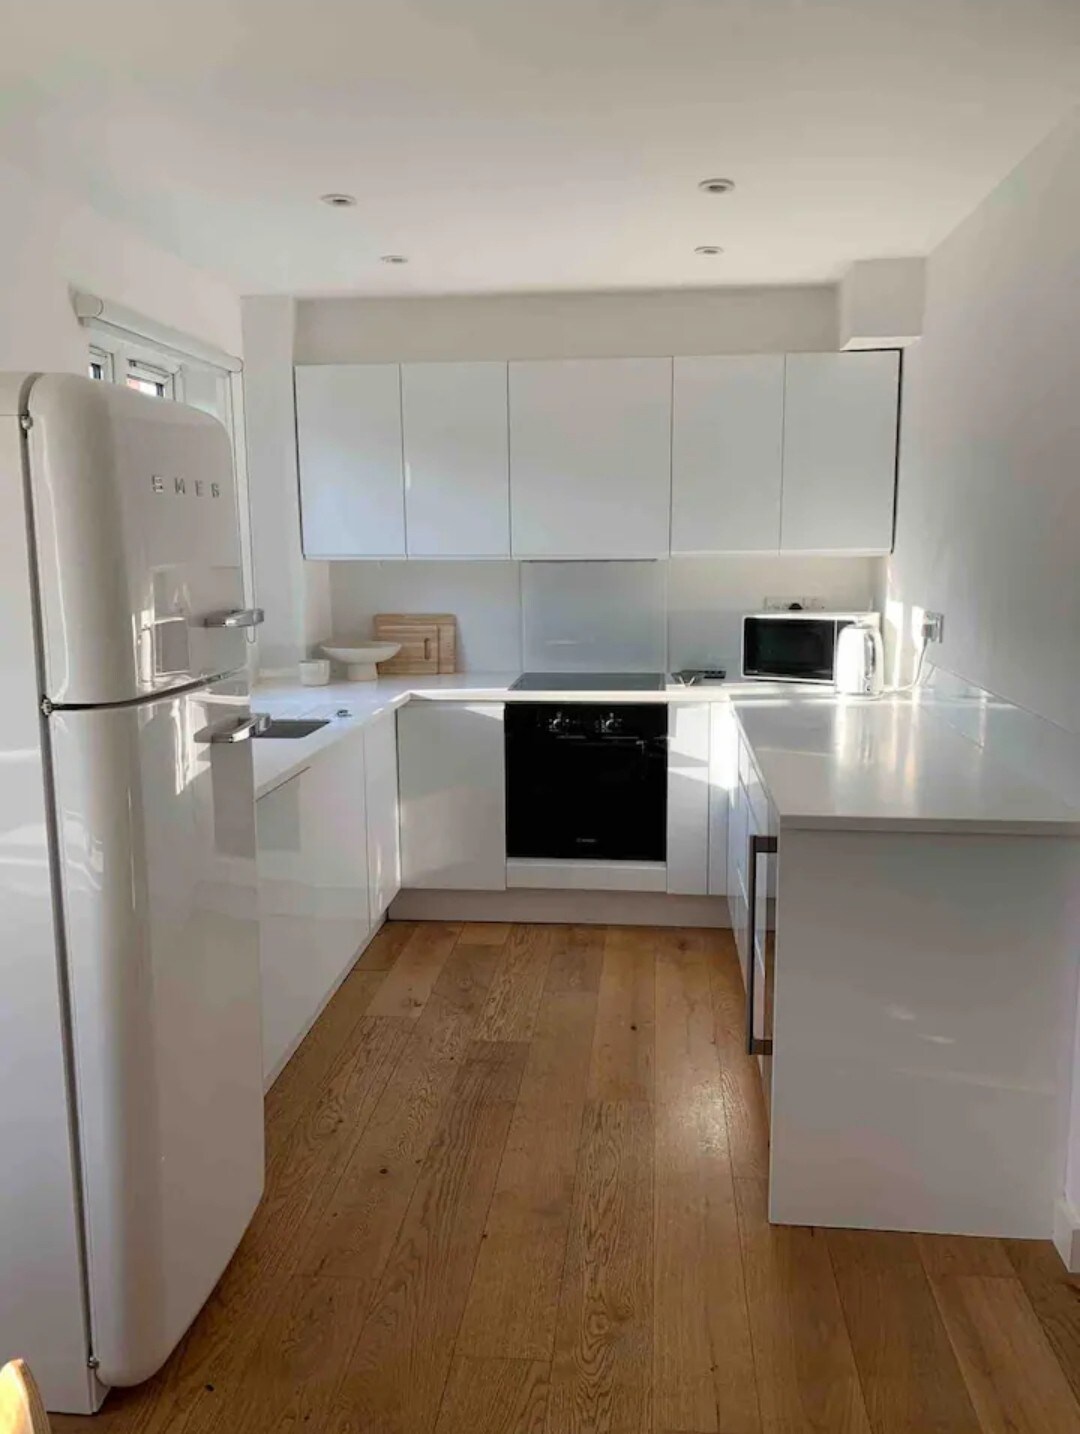 2 Bed Apartment Catford - Perfect for Long stays